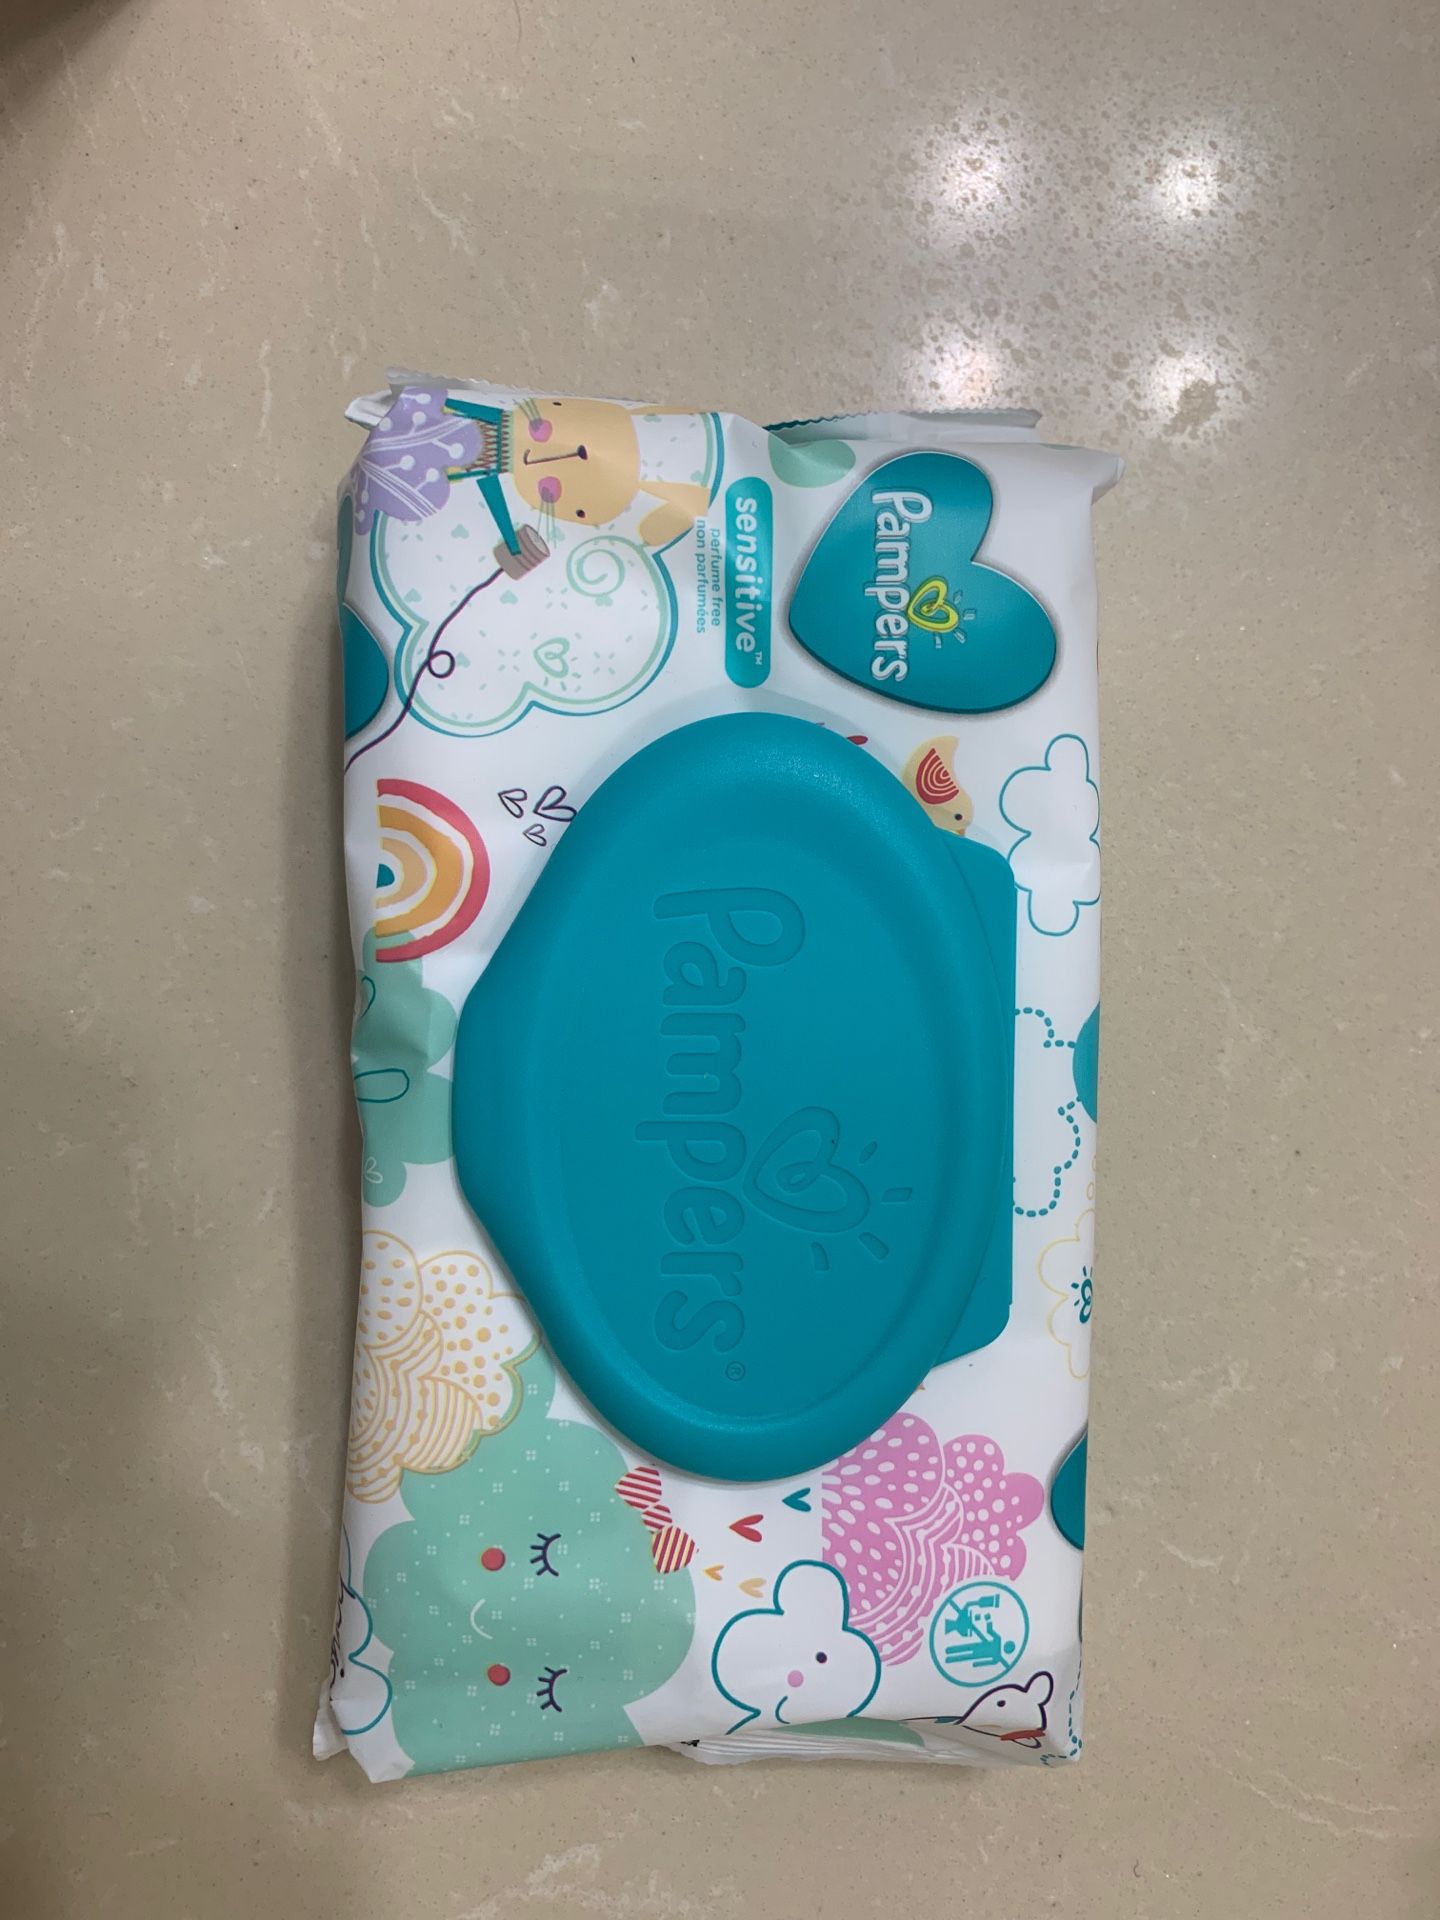 Pampers sensitive wipes